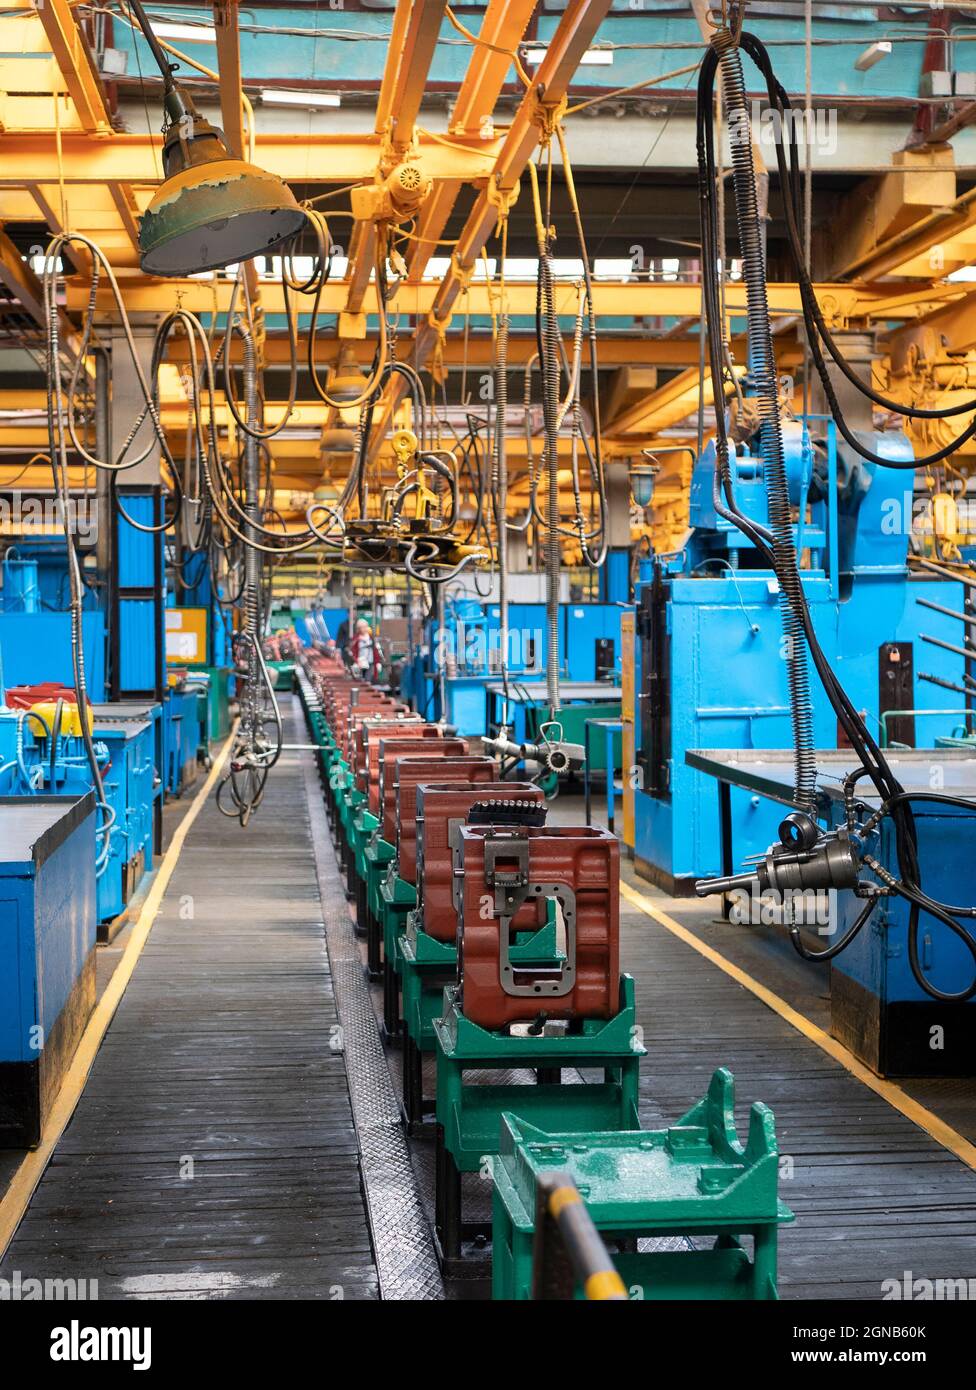 Transmission gearbox final assembly line at the tractor factory. Assembling shop interior. Tractor machinery components Stock Photo